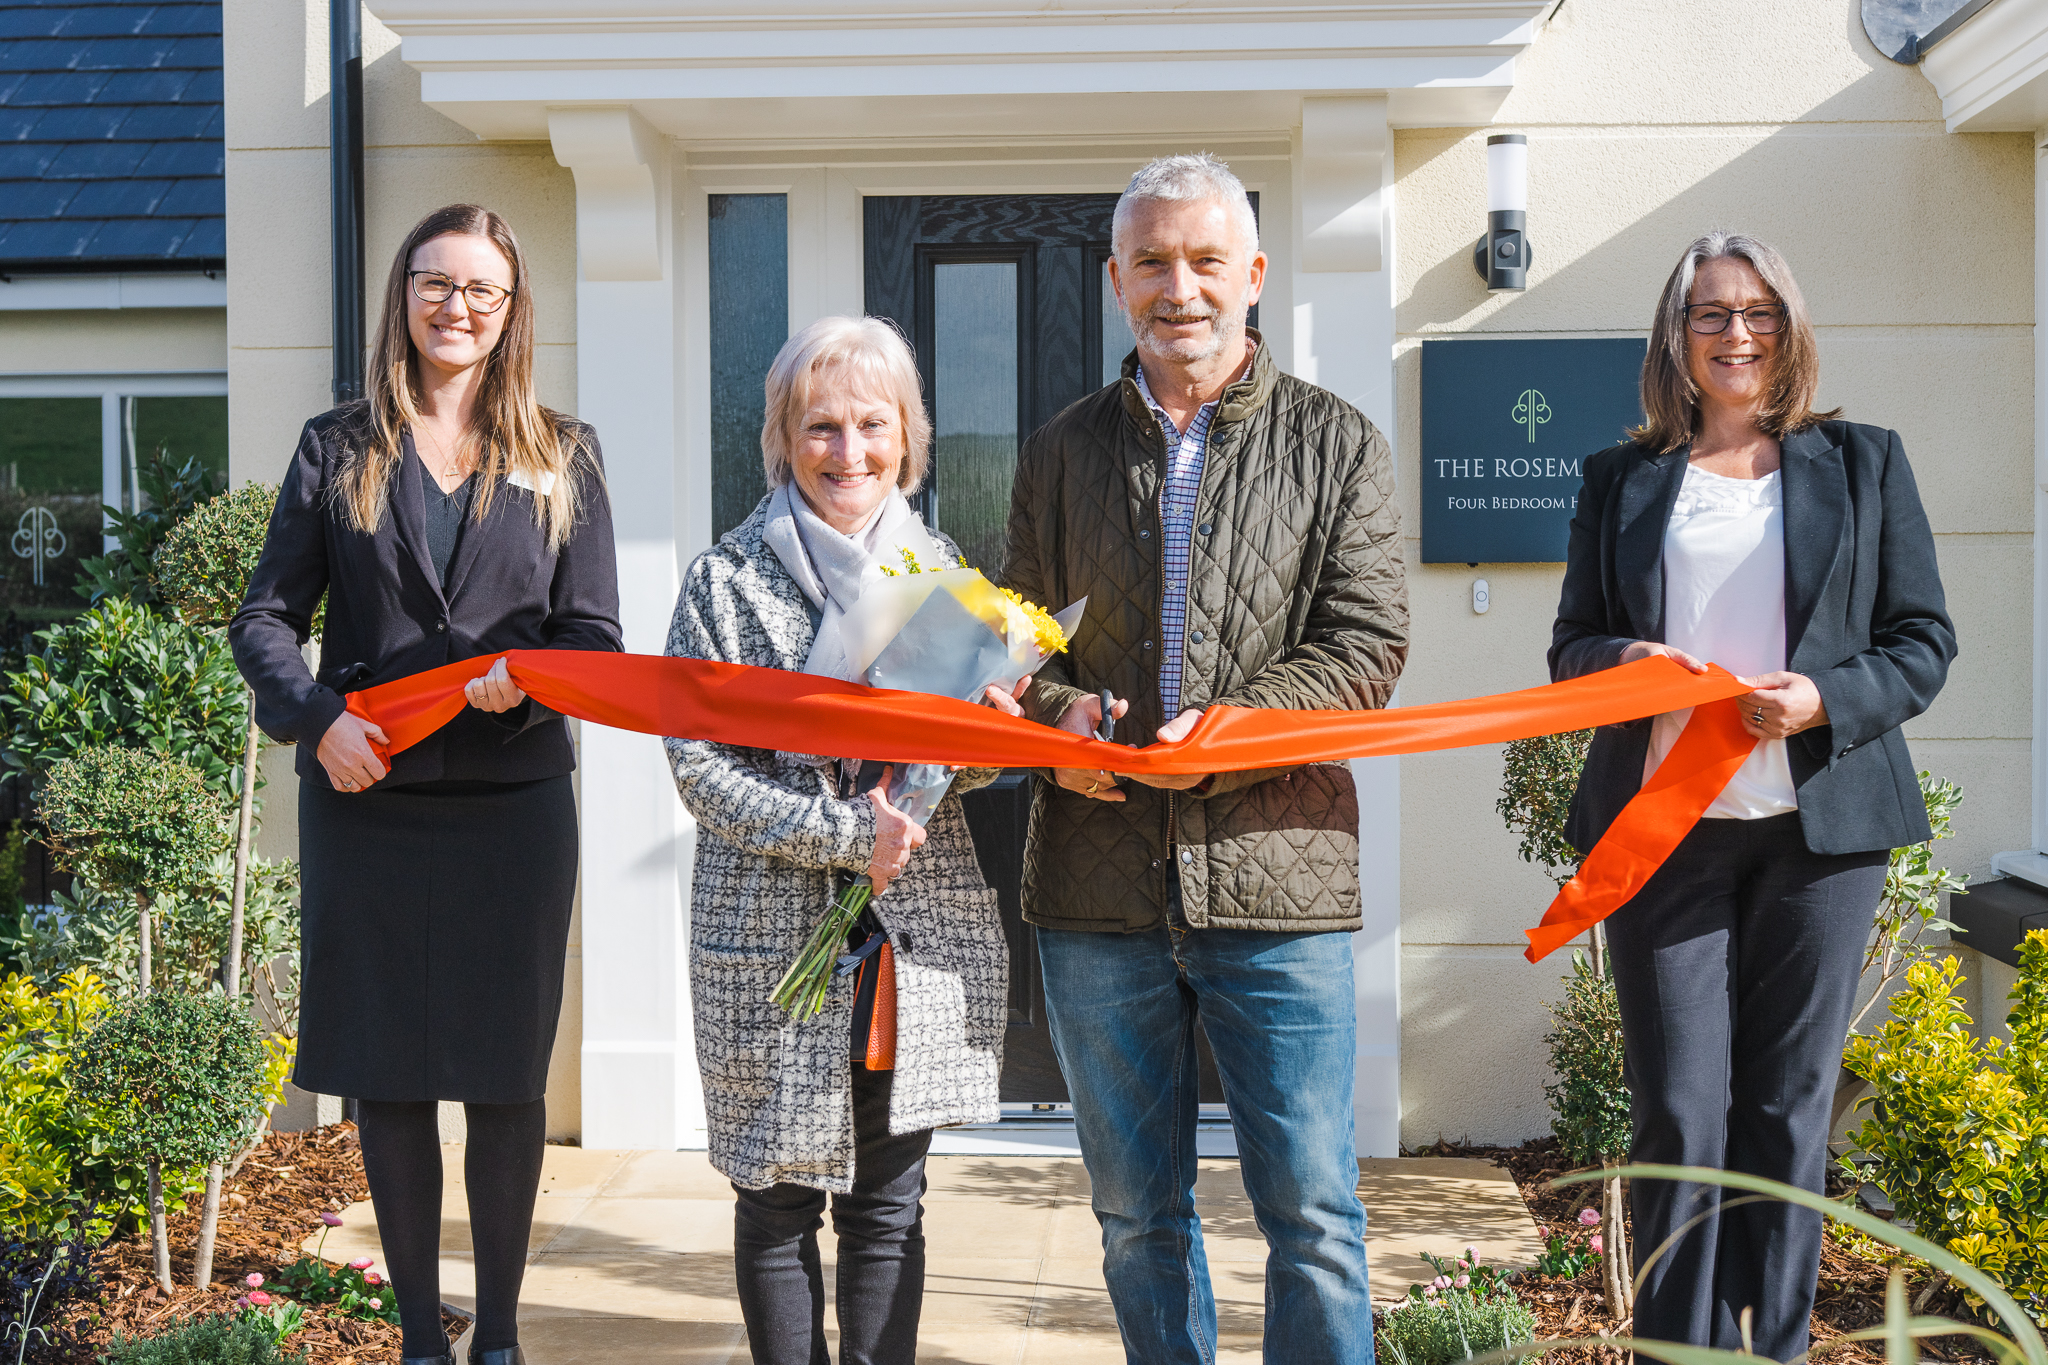 Local couple officially open Baker Estates’ stunning new show home in Appledore